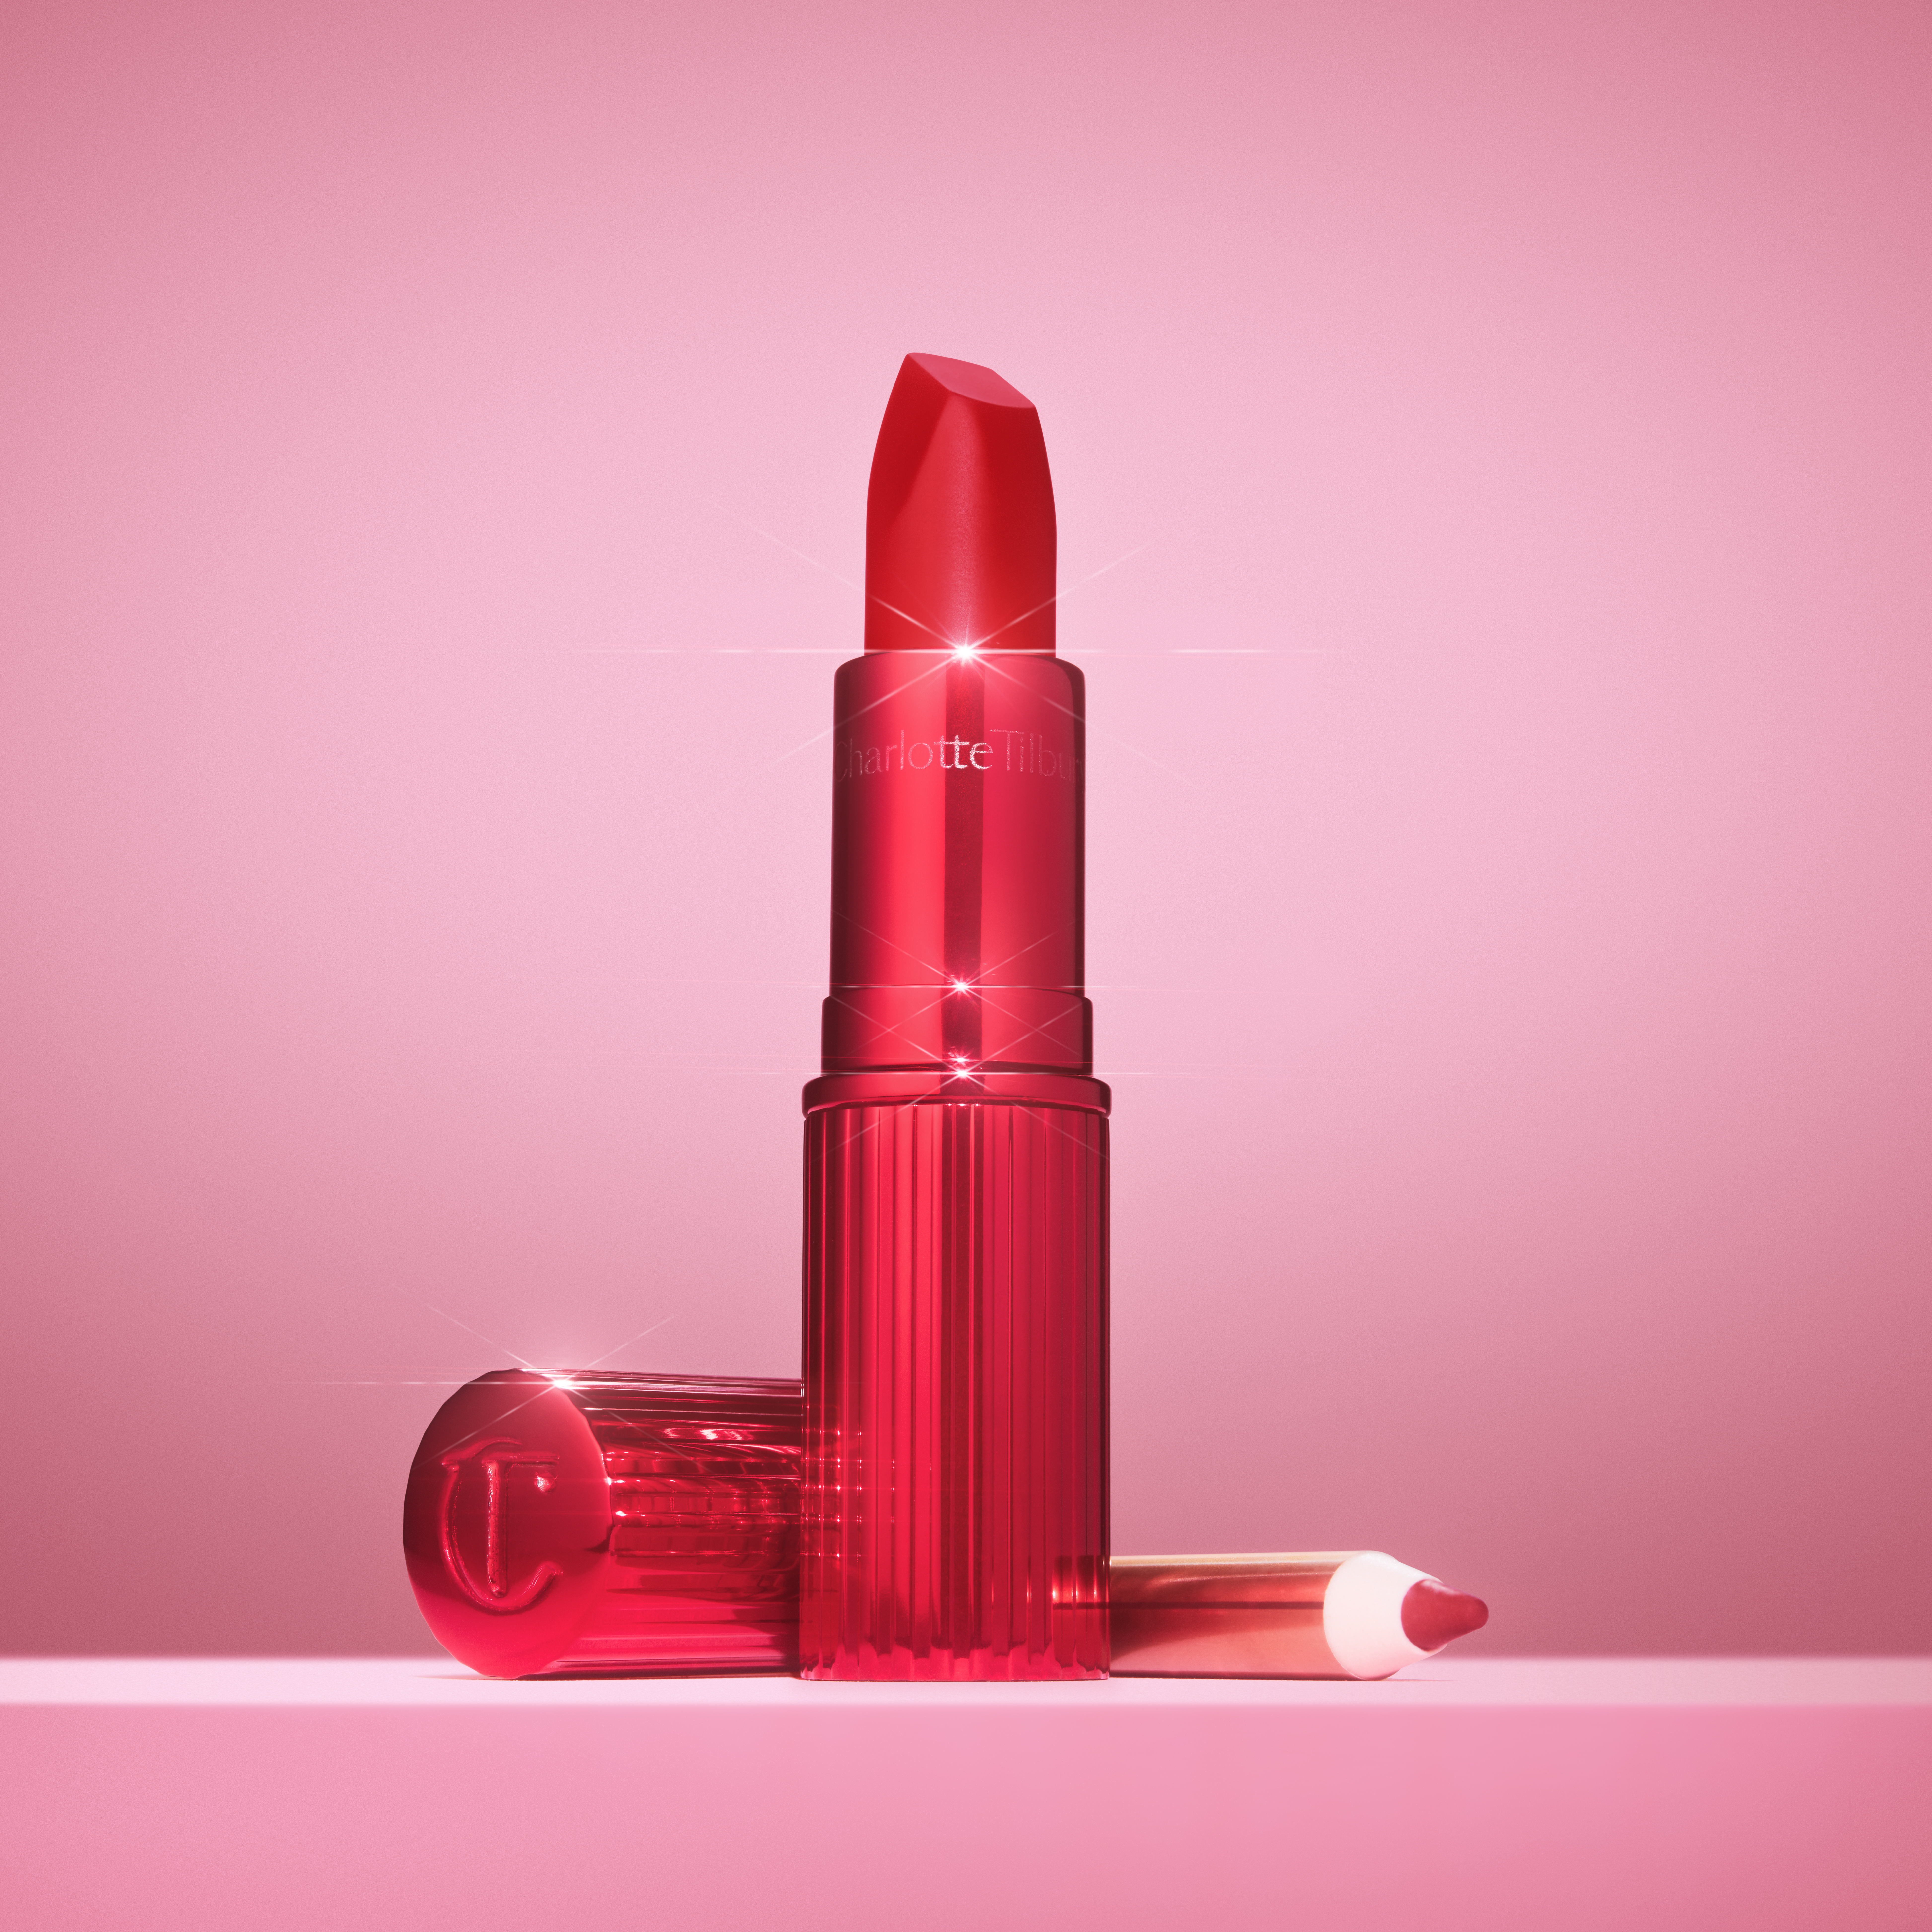 Still life del rossetto rosso Hollywood Beauty Icon